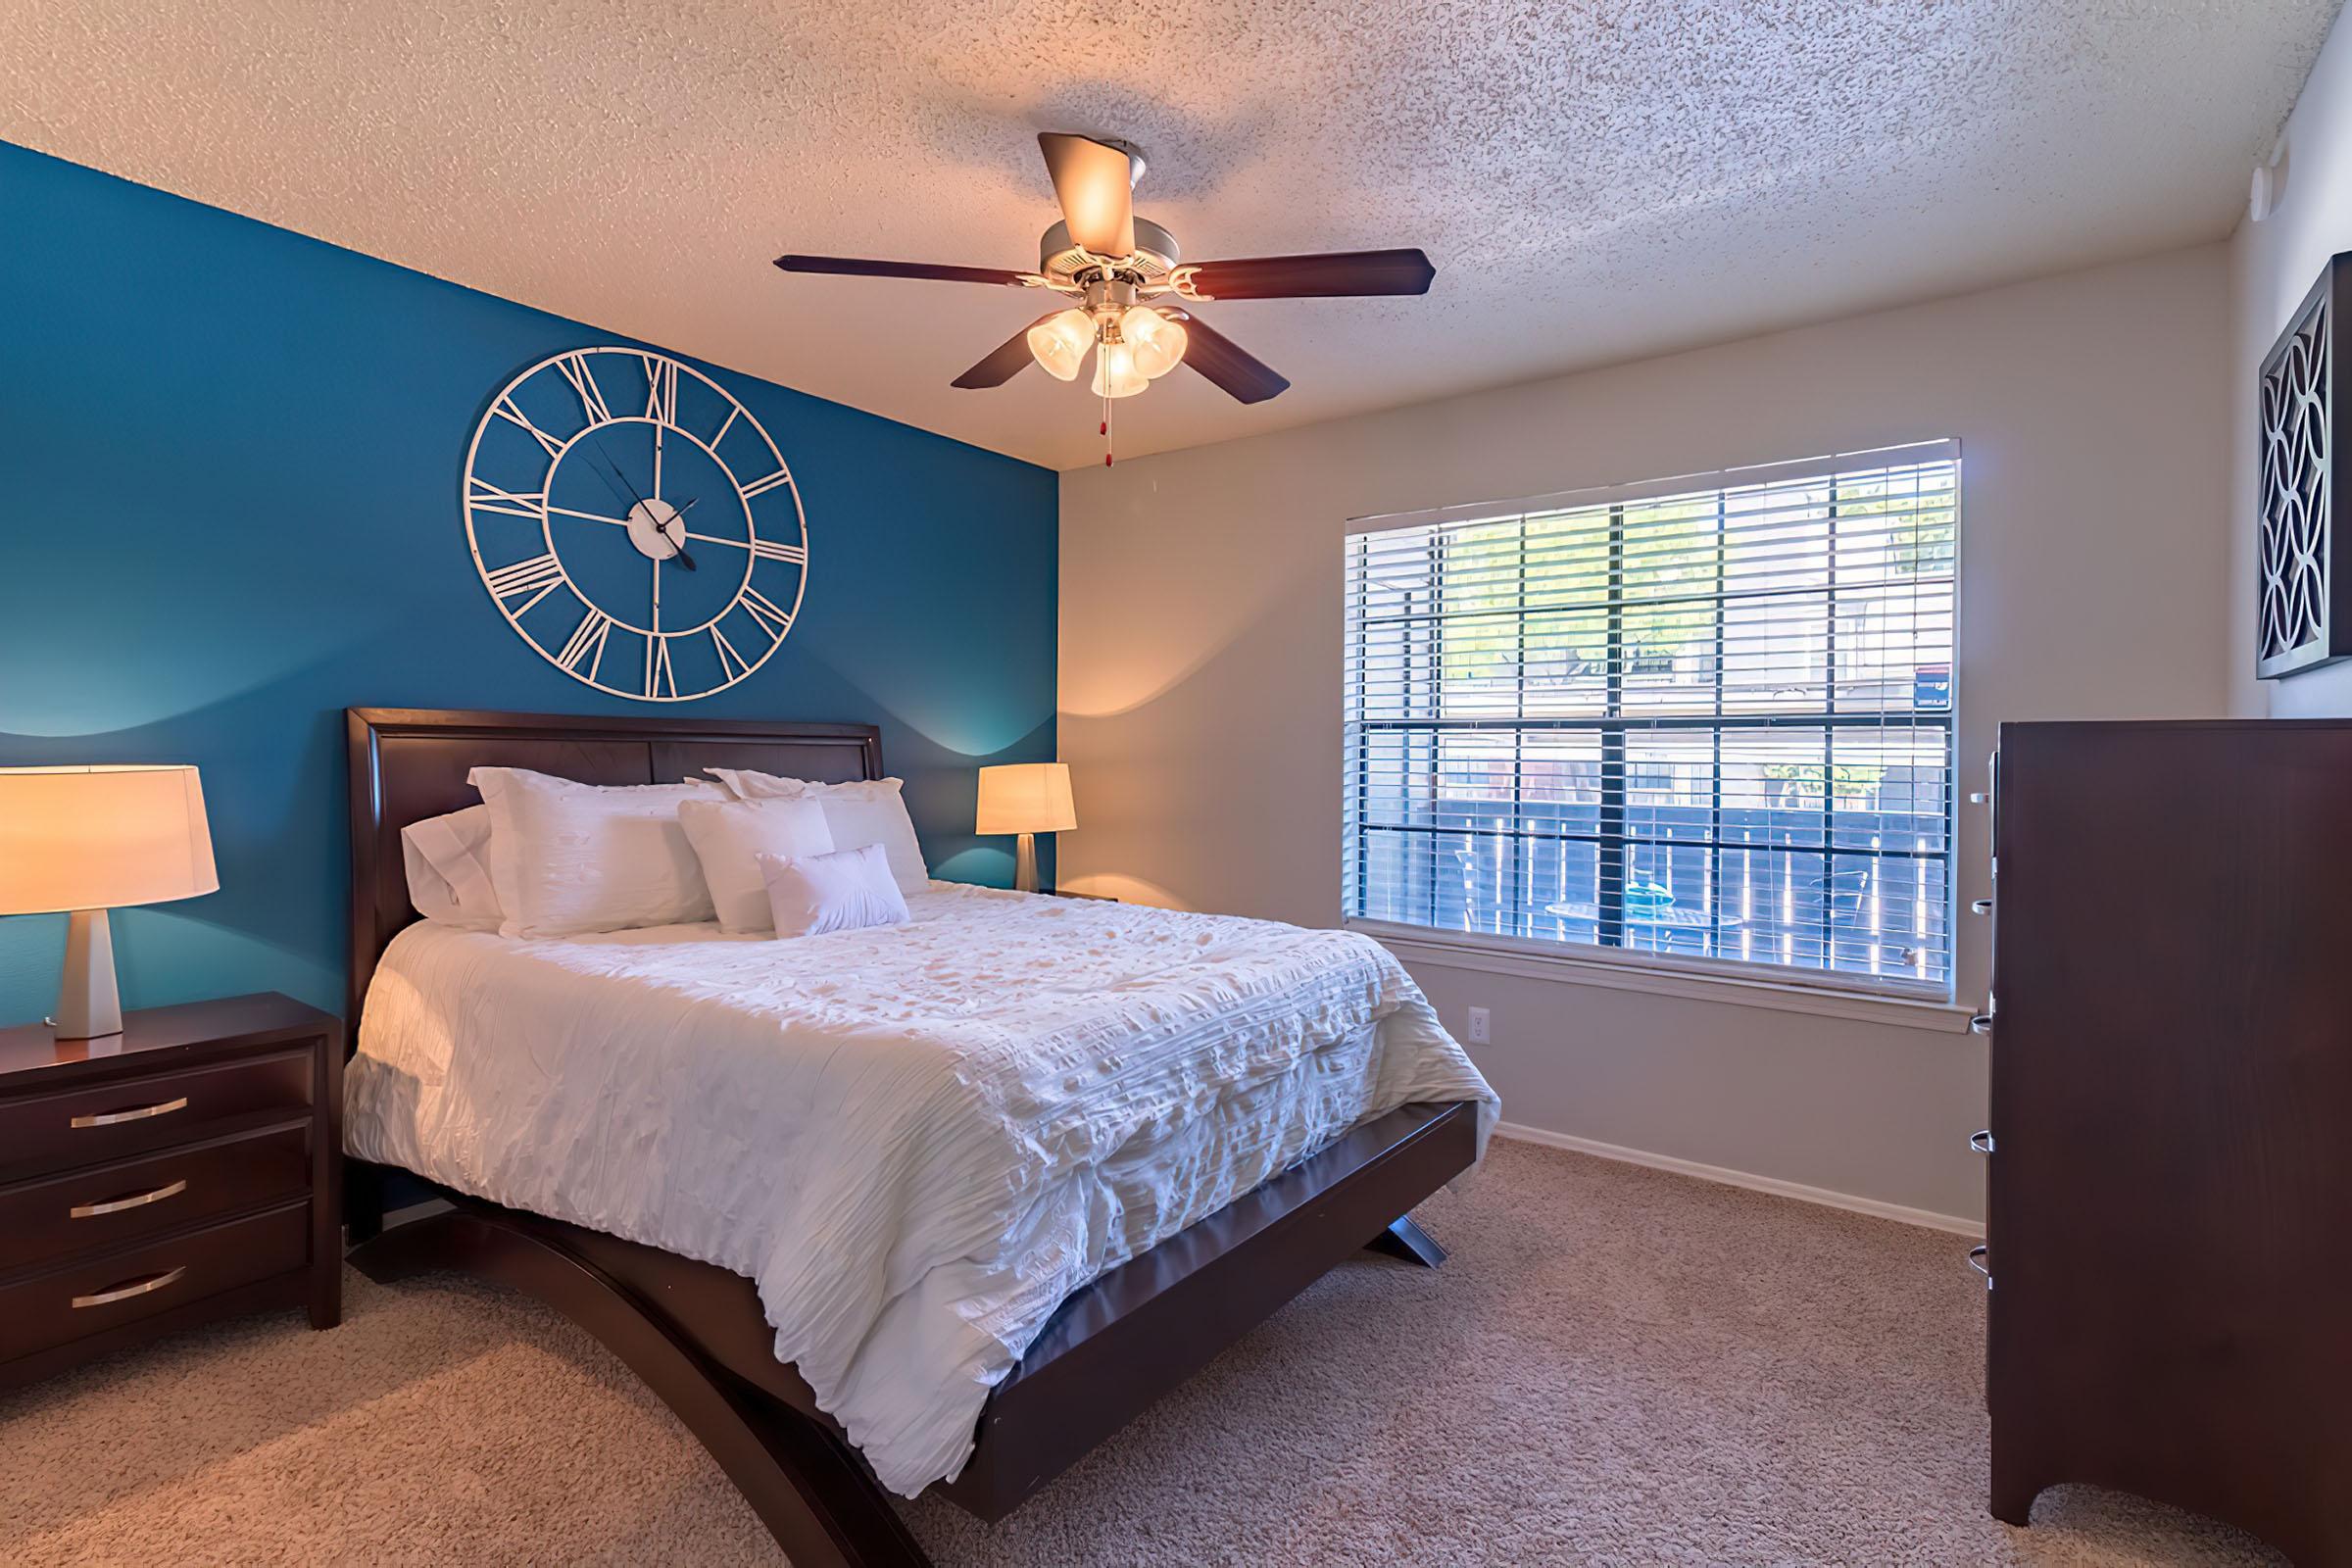 a bedroom with a clock at the top of a bed